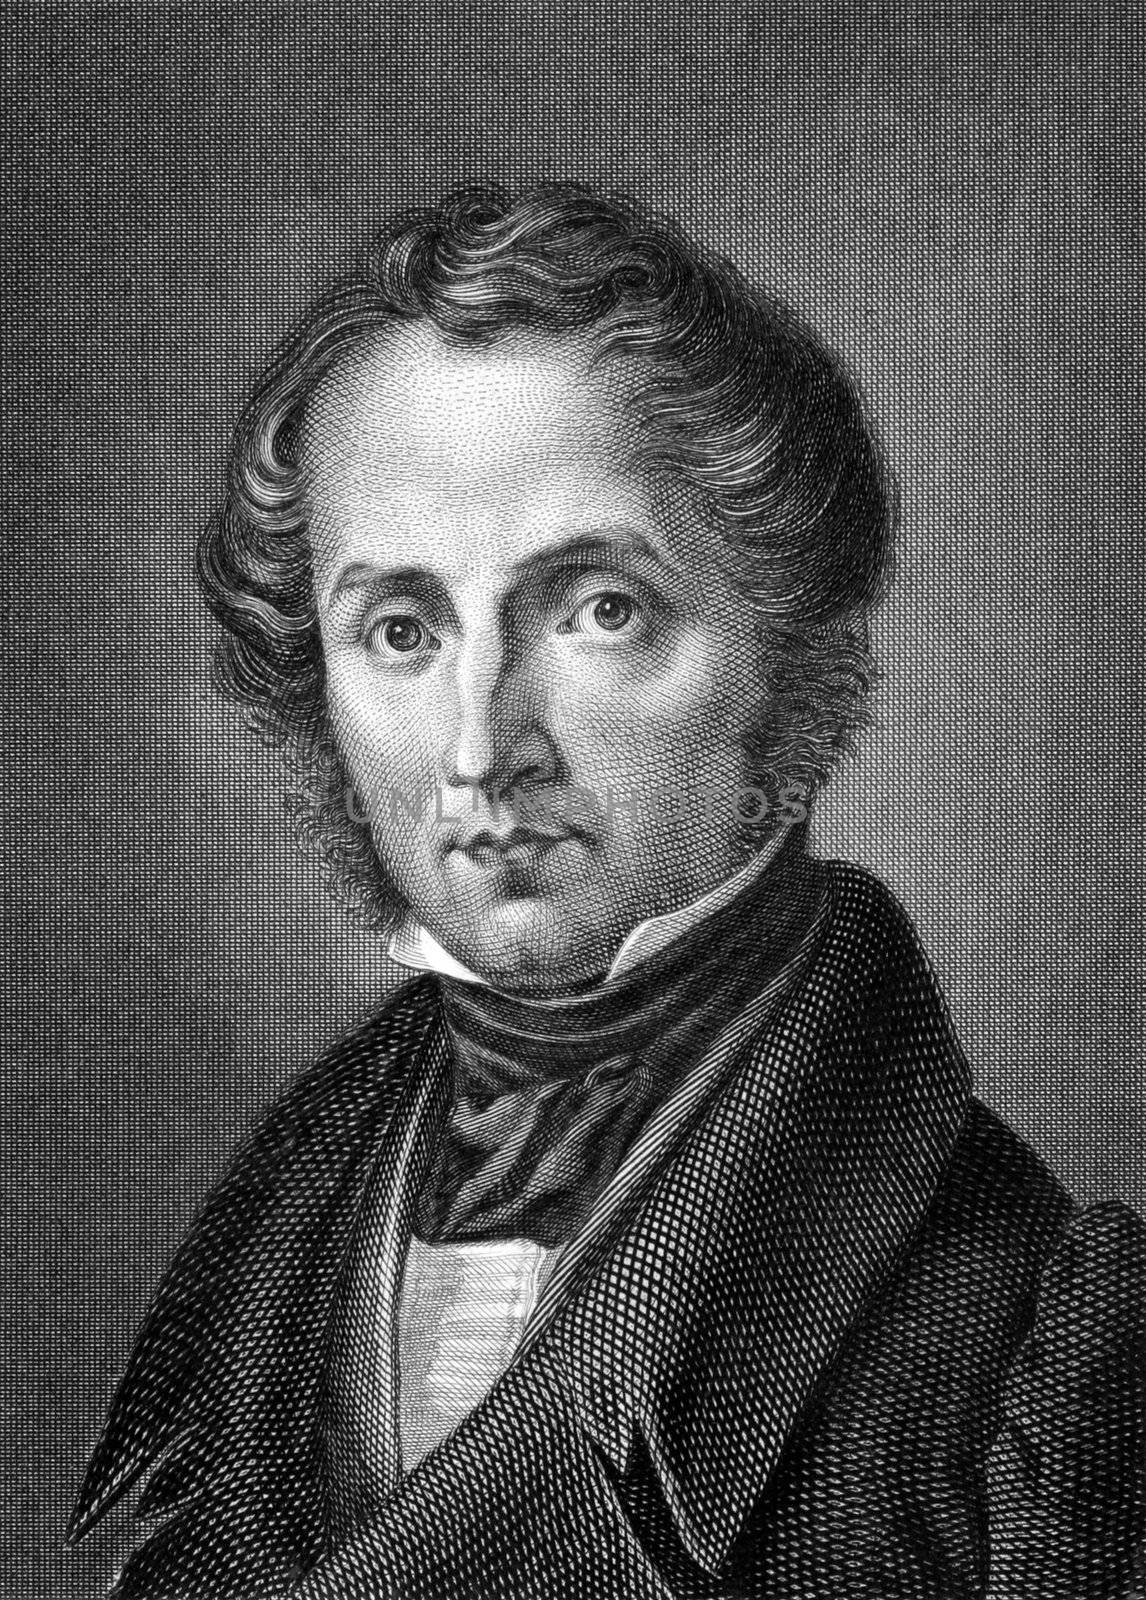 Justus von Liebig (1803-1873) on engraving from 1859.  German chemist. Engraved by C.Barth and published in Meyers Konversations-Lexikon, Germany,1859.